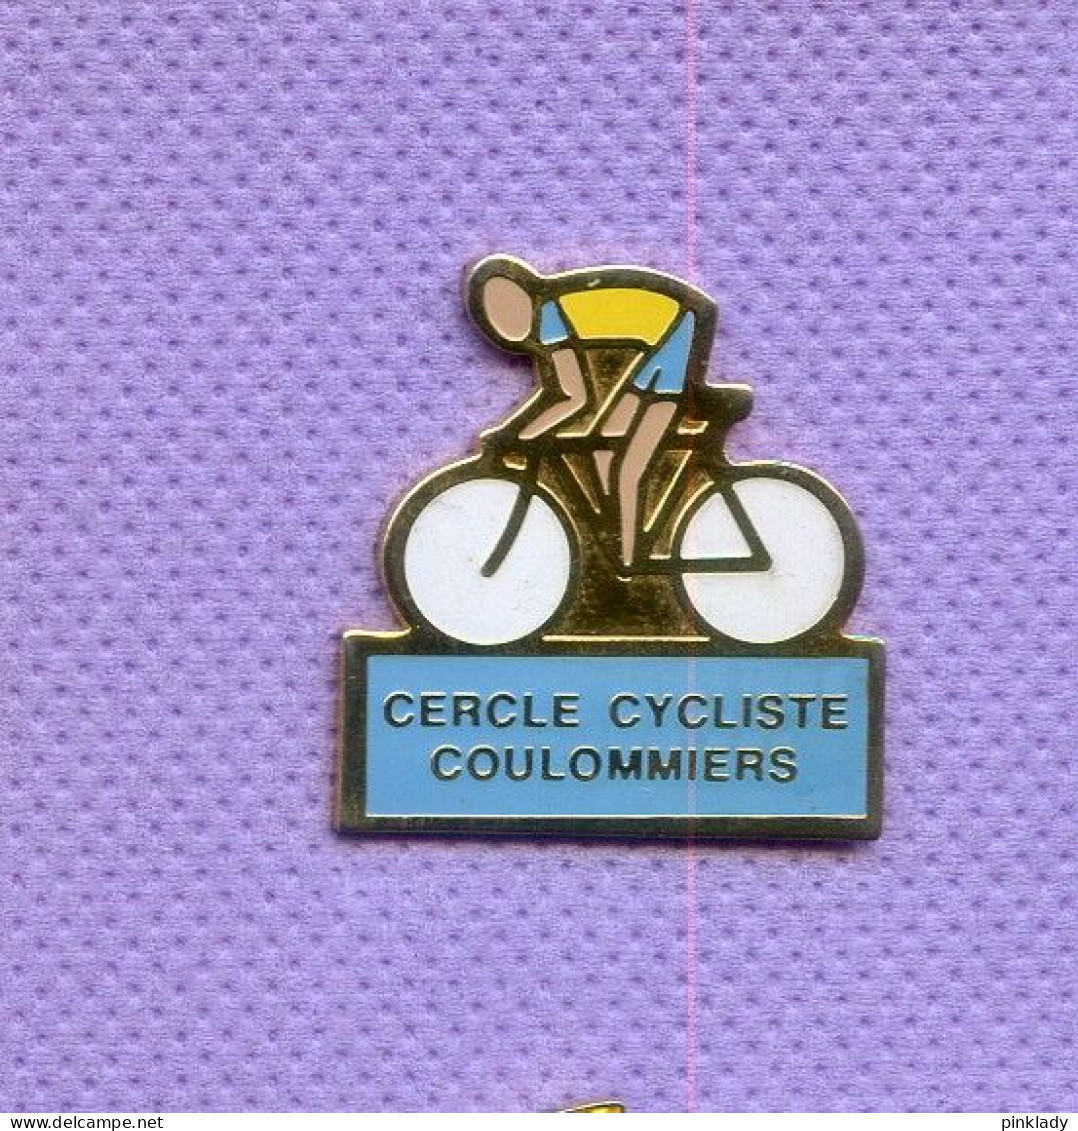 Rare Pins Cyclisme Velo Cercle Cycliste Coulommiers Seine Et Marne 77 I330 - Wielrennen